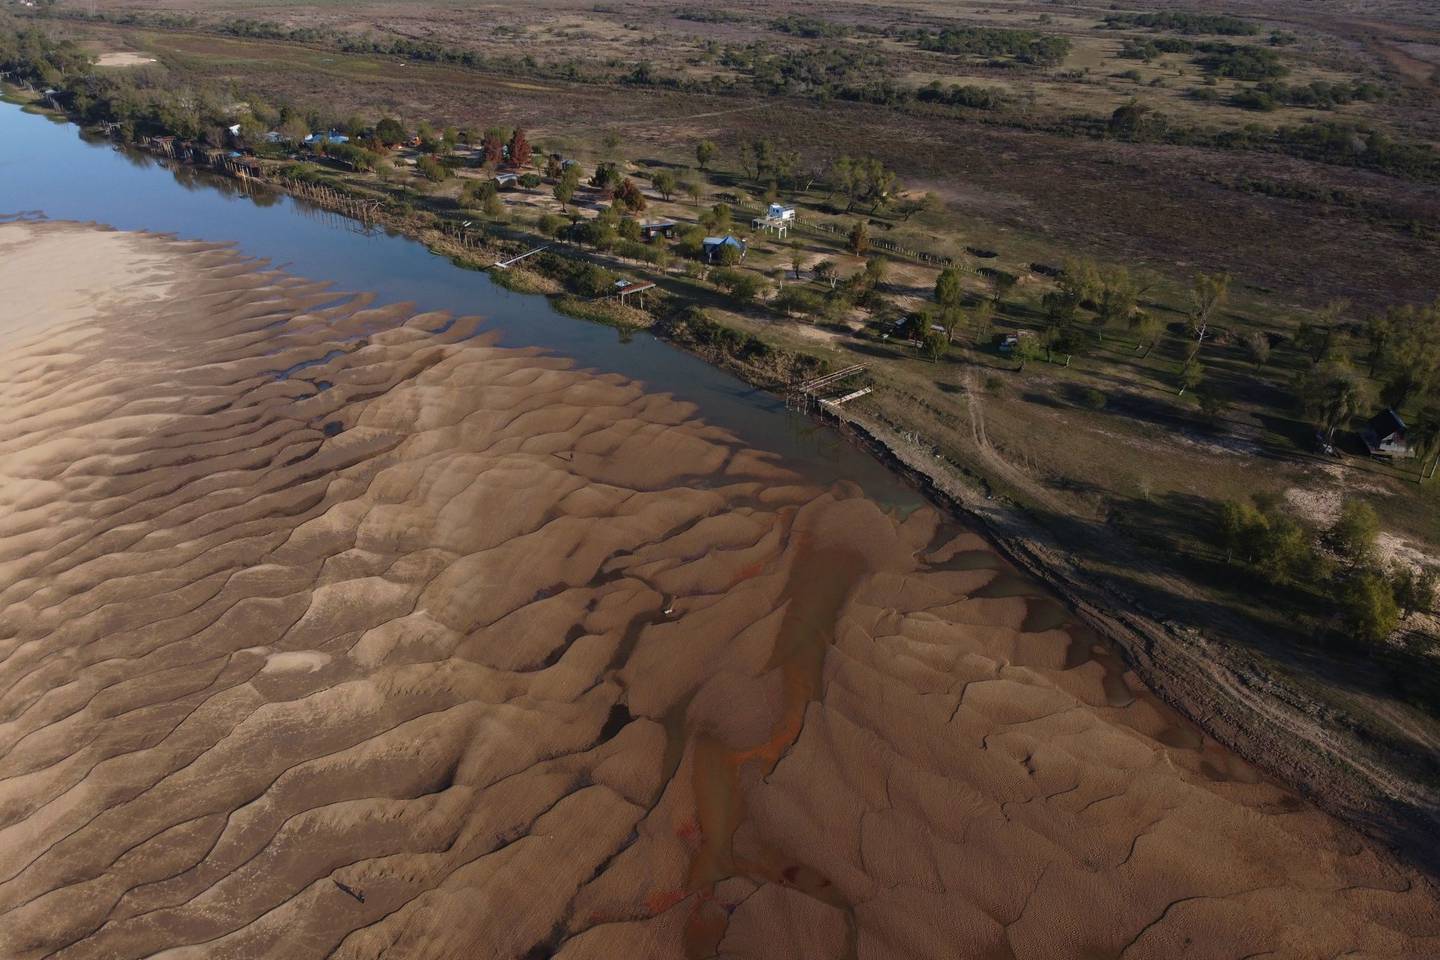 Dry land surrounds the Parana river as water levels recede in Rosario, Argentina, on June 24.